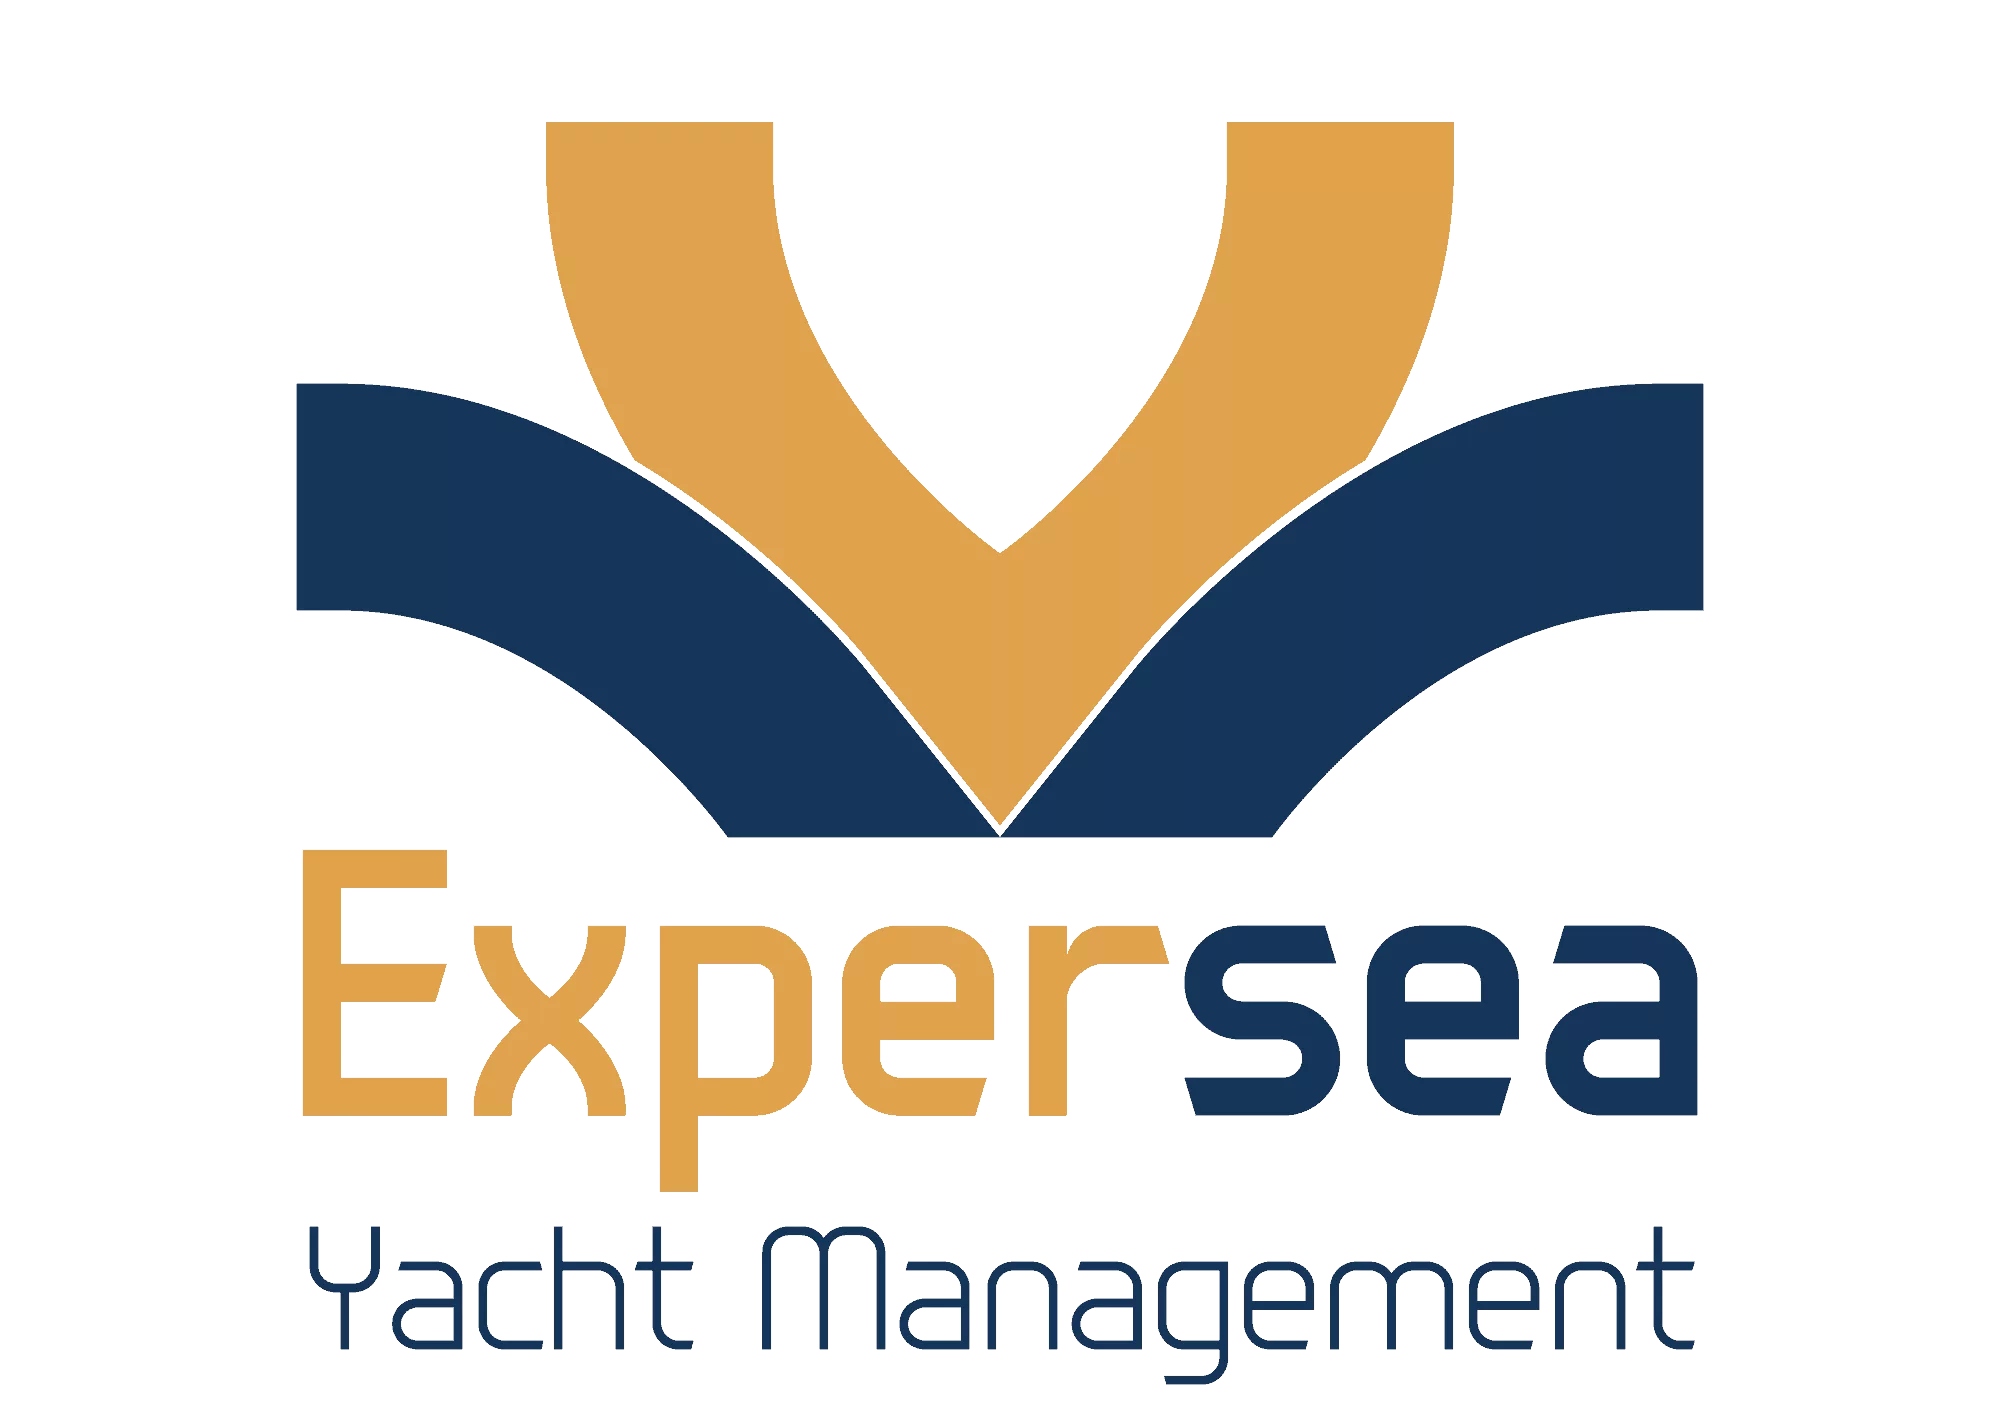 Expersea Yacht Management logo